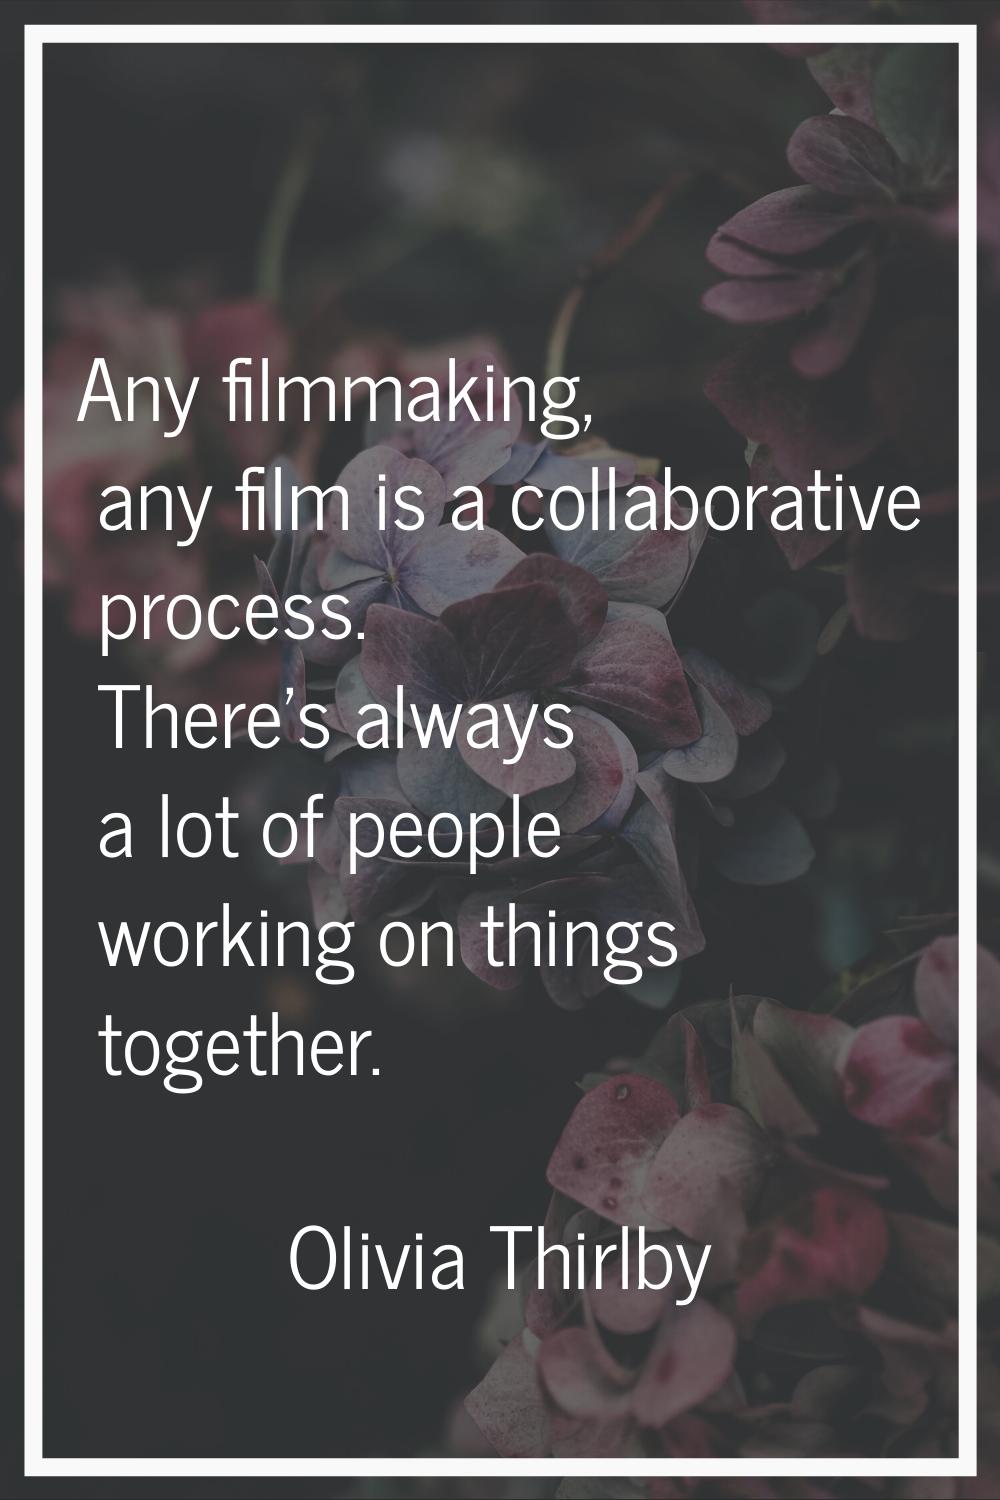 Any filmmaking, any film is a collaborative process. There's always a lot of people working on thin